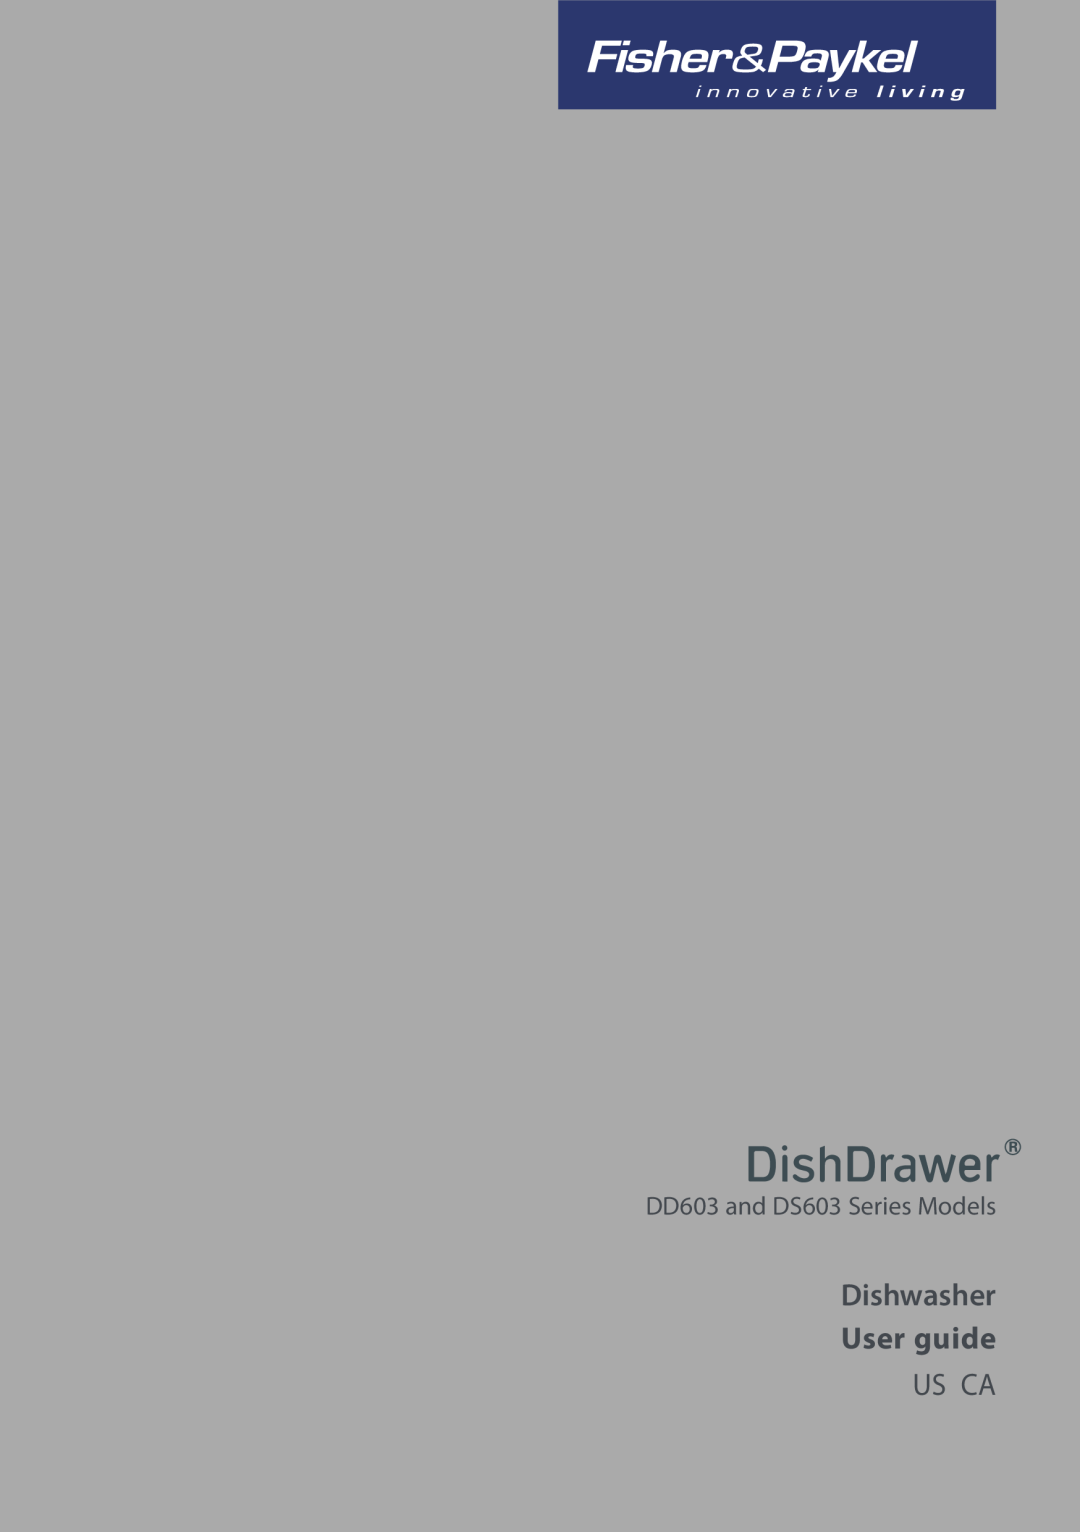 Fisher & Paykel DS603 manual Dishwasher User guide, Us Ca 